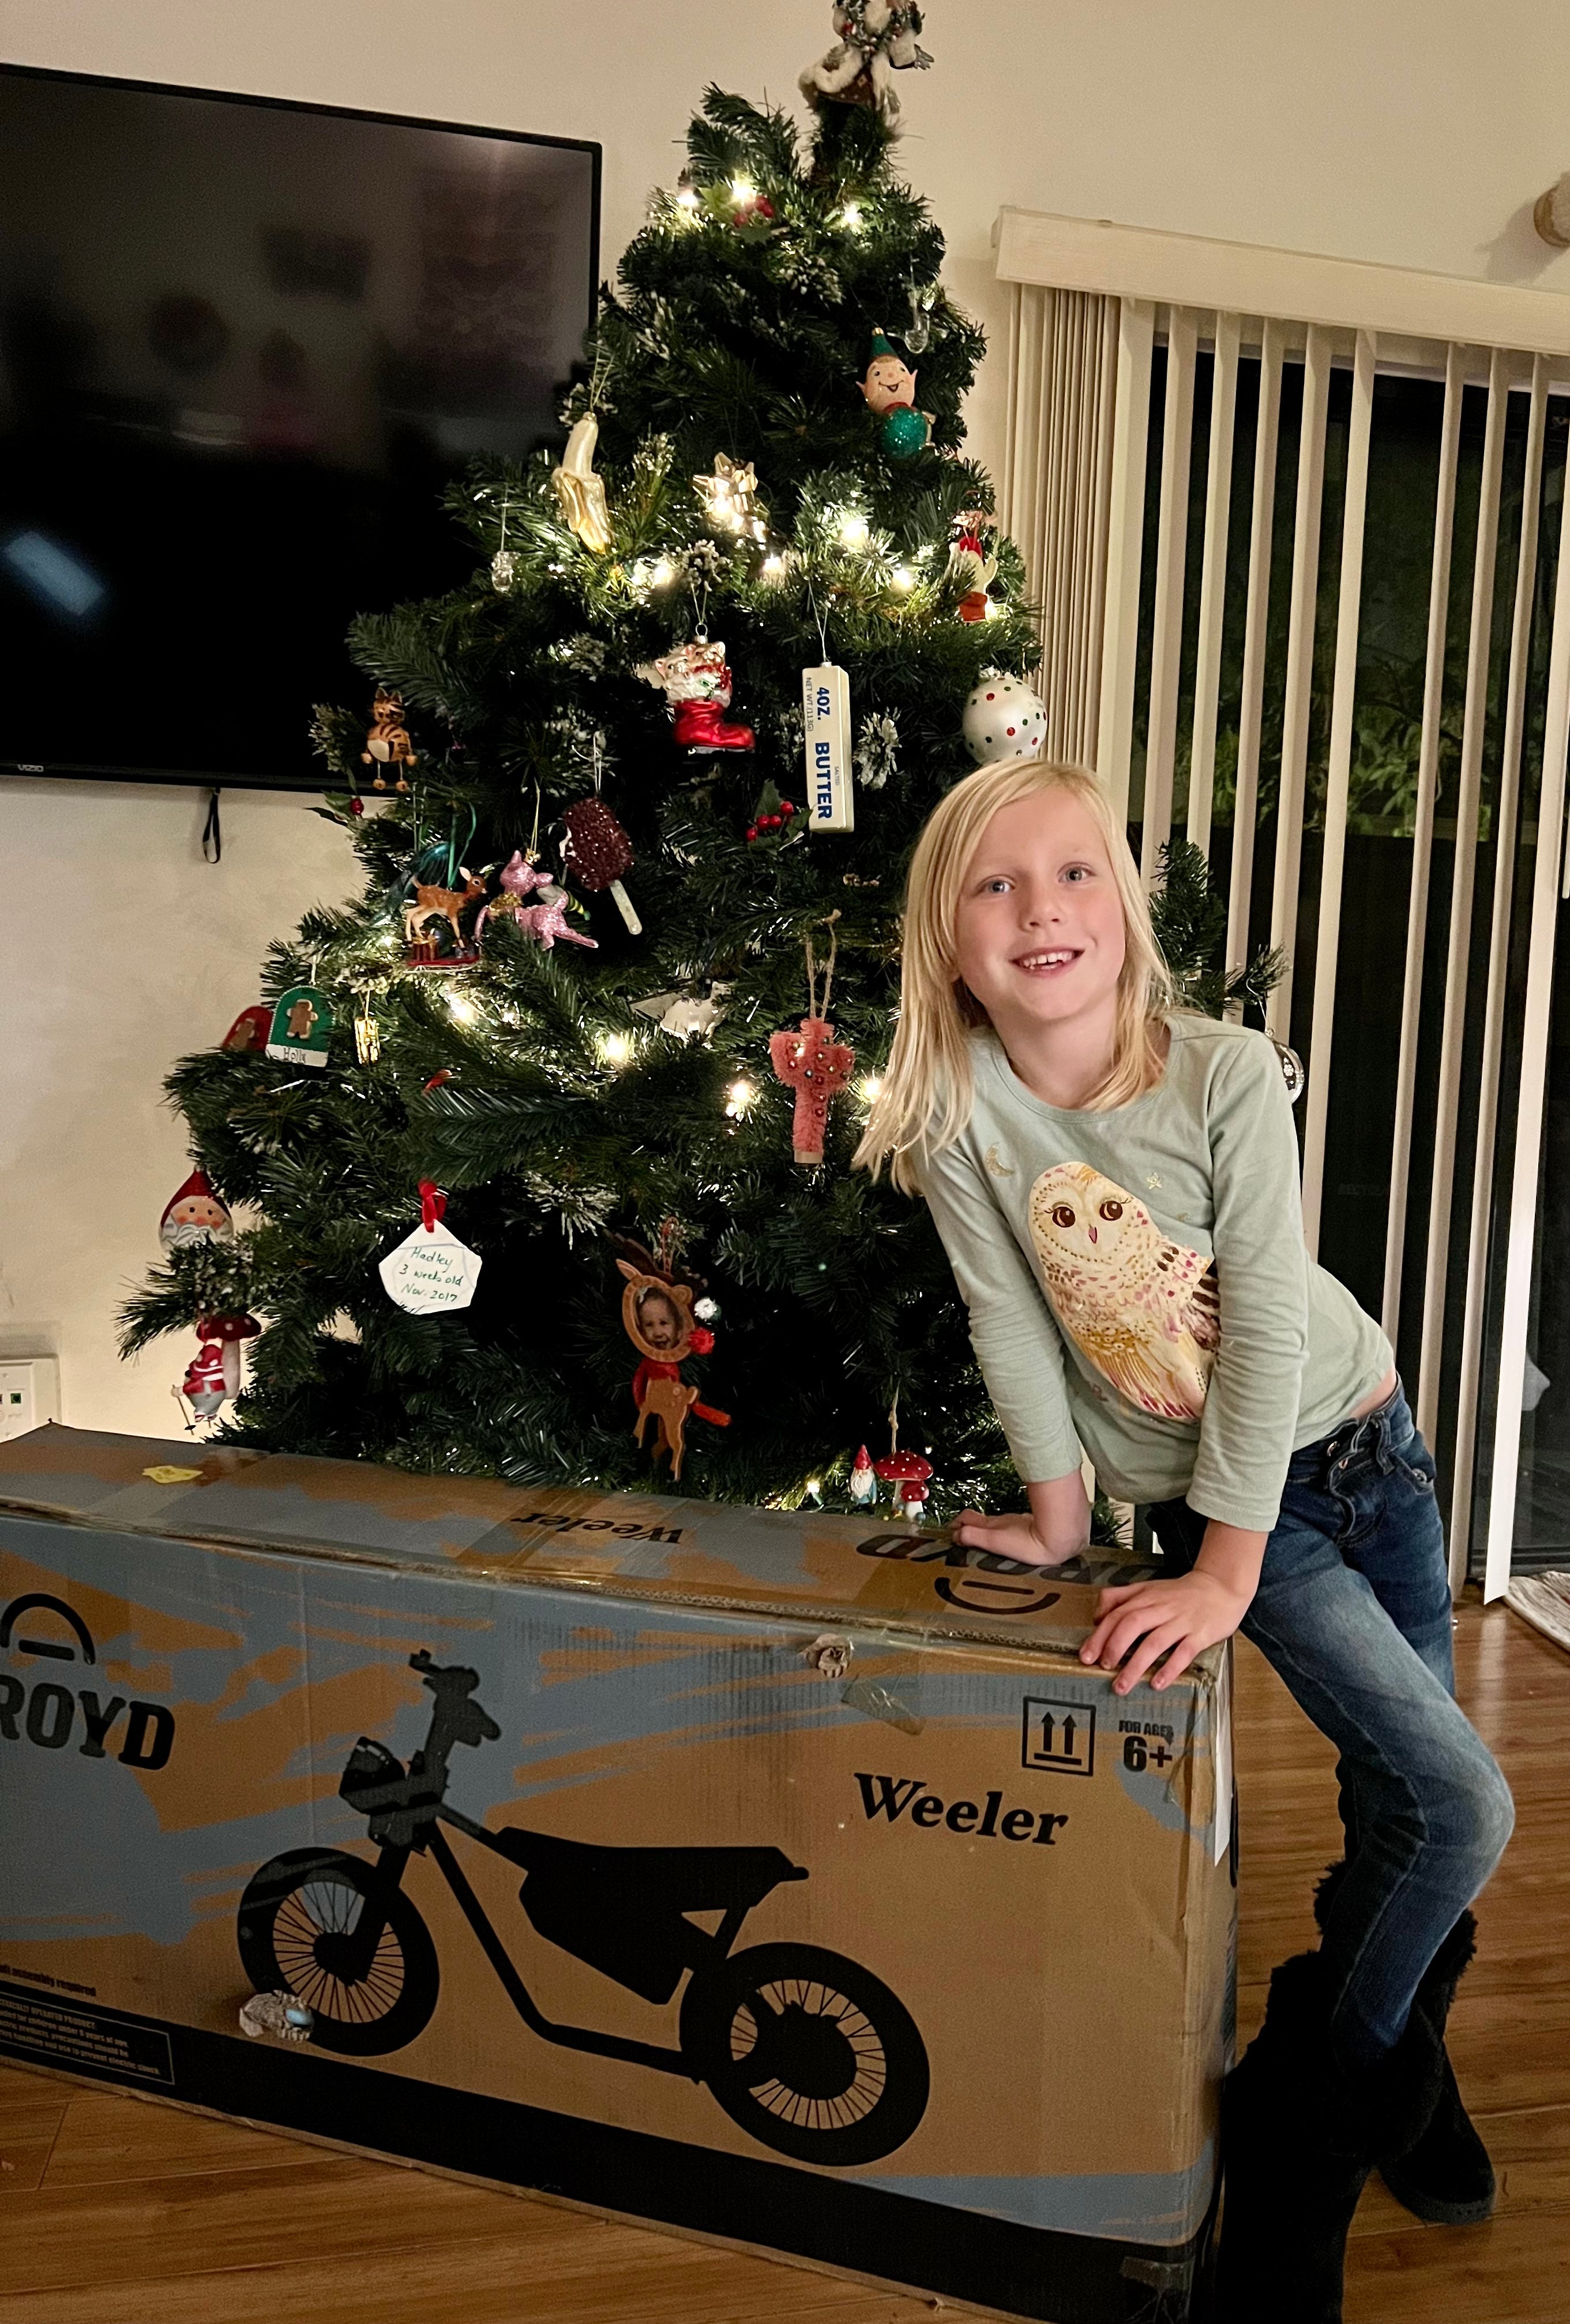 3 Reasons Droyd Electric Rideables Are the Hot Gift for the 2022 Holidays